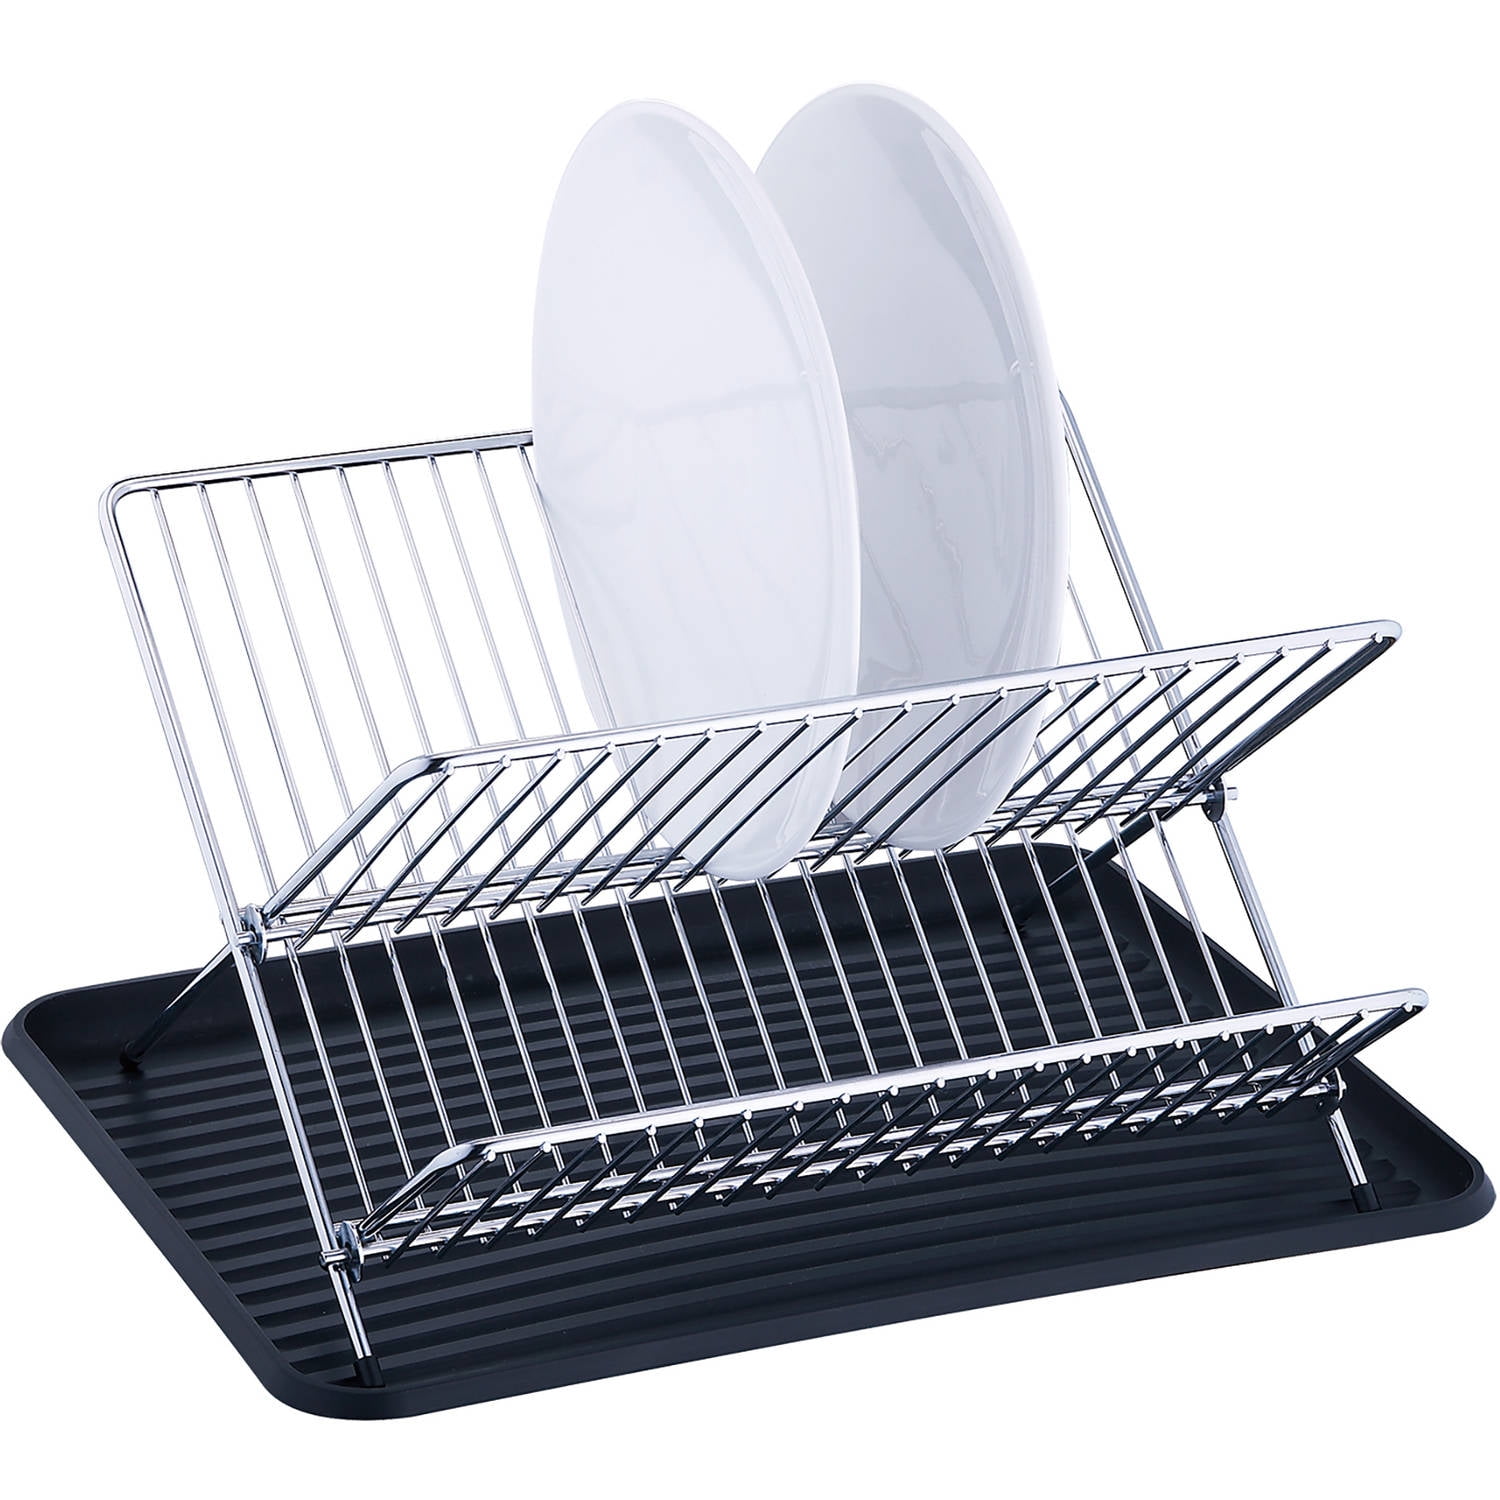 Anti-Rust Chrome Finish and a Non-Slip Base from Jean-Patrique Features an Expandable Two-Tier Design for Extra Capacity Folding Dish Drainer with Tray